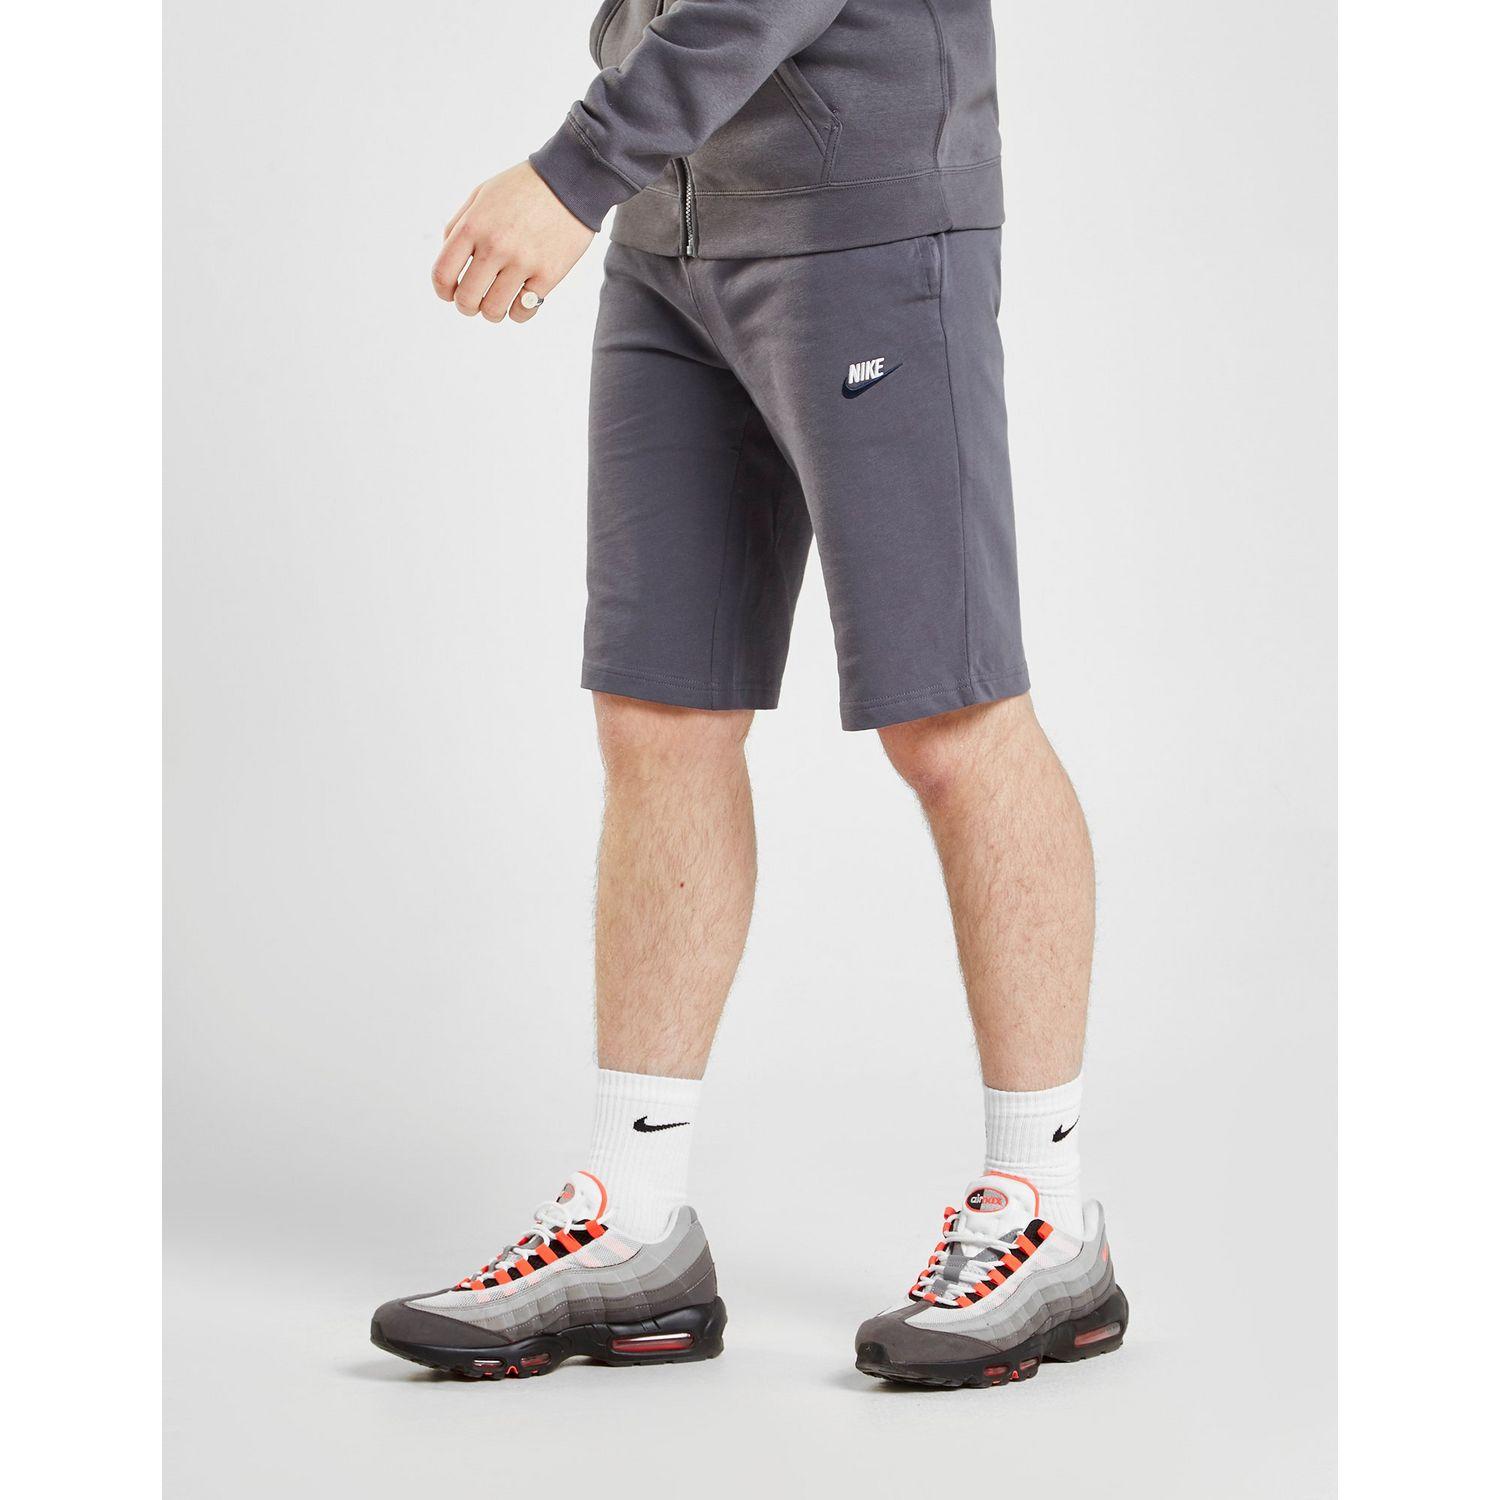 Nike Cotton Foundation Jersey Shorts in 